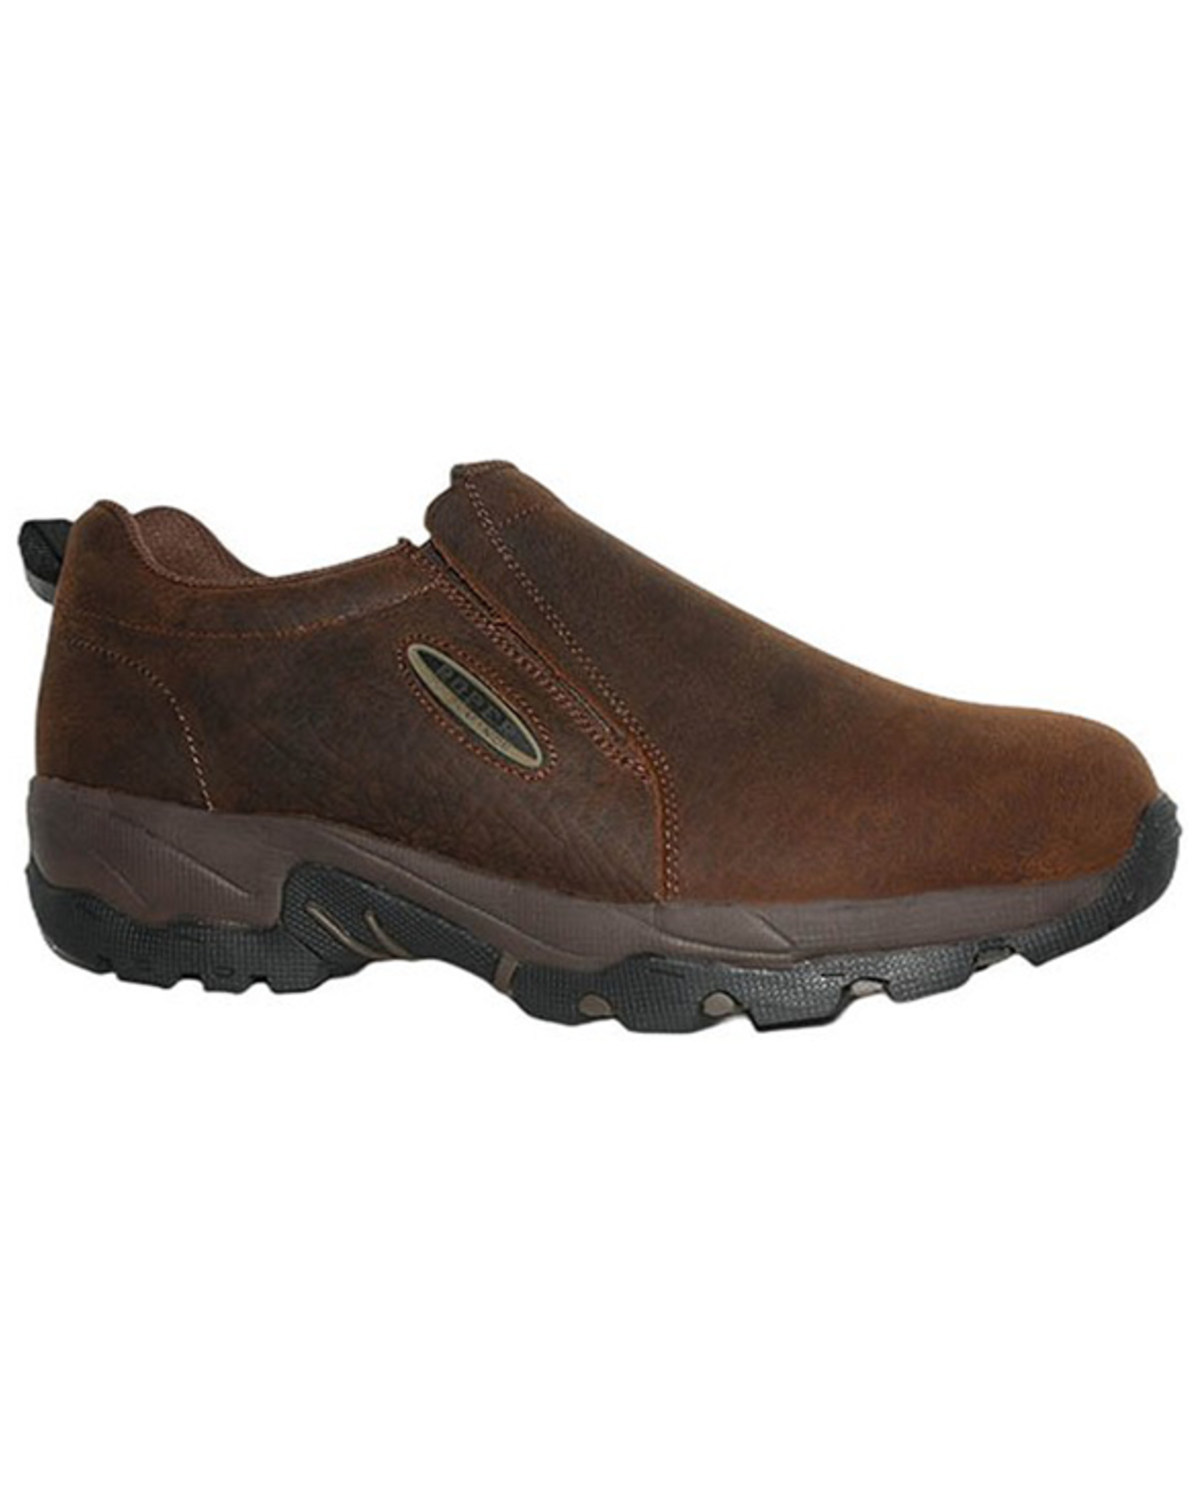 Roper Men's Air Light Casual Shoes - Round Toe